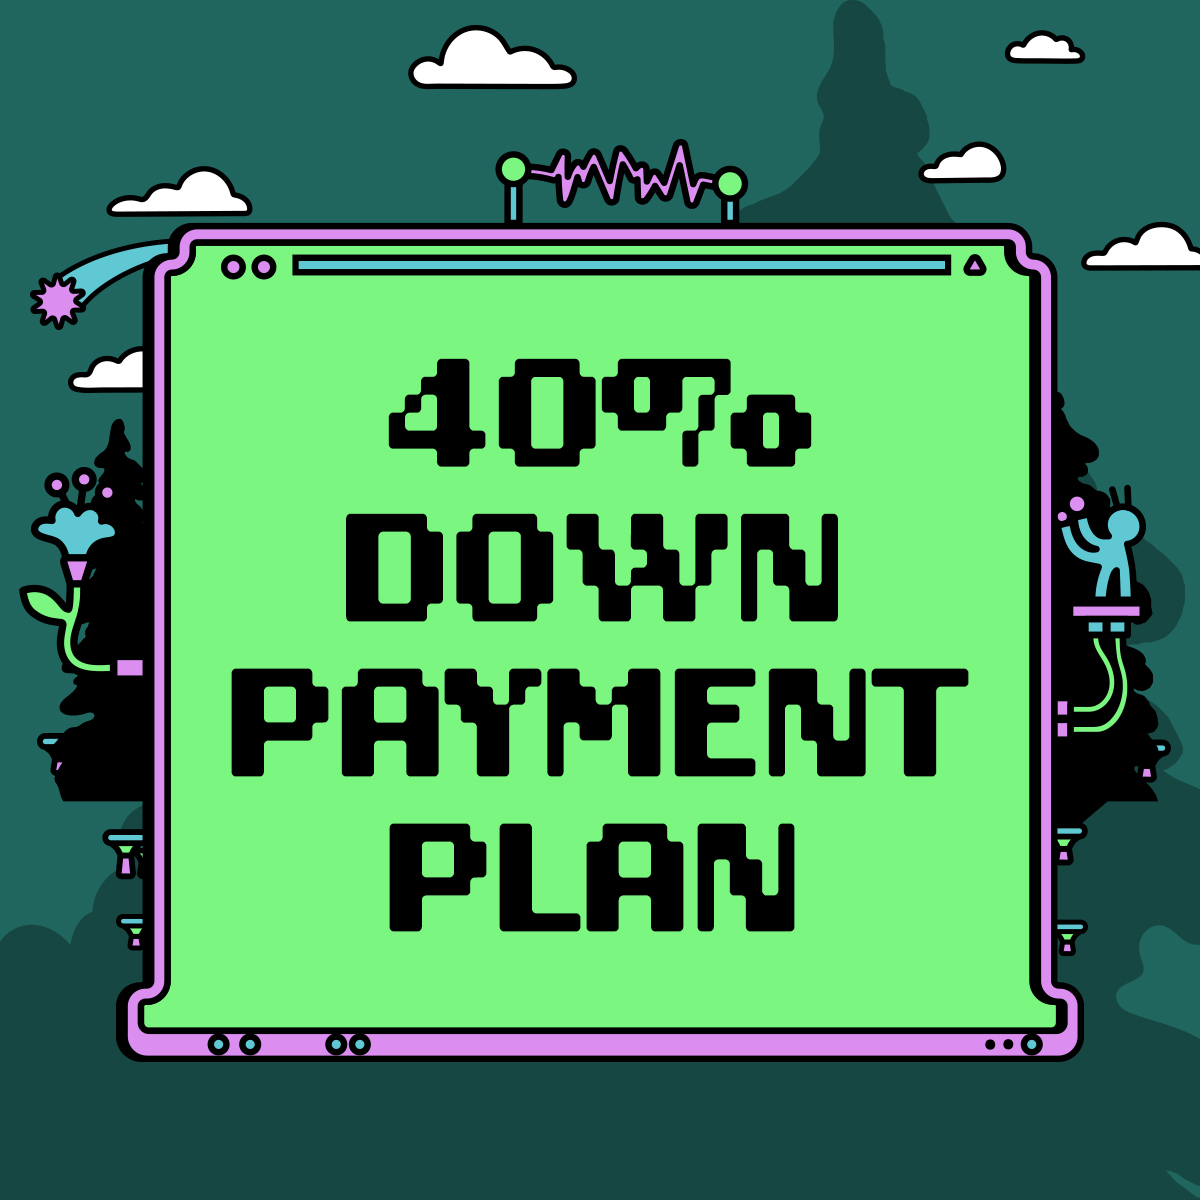 40% Down Payment Plan